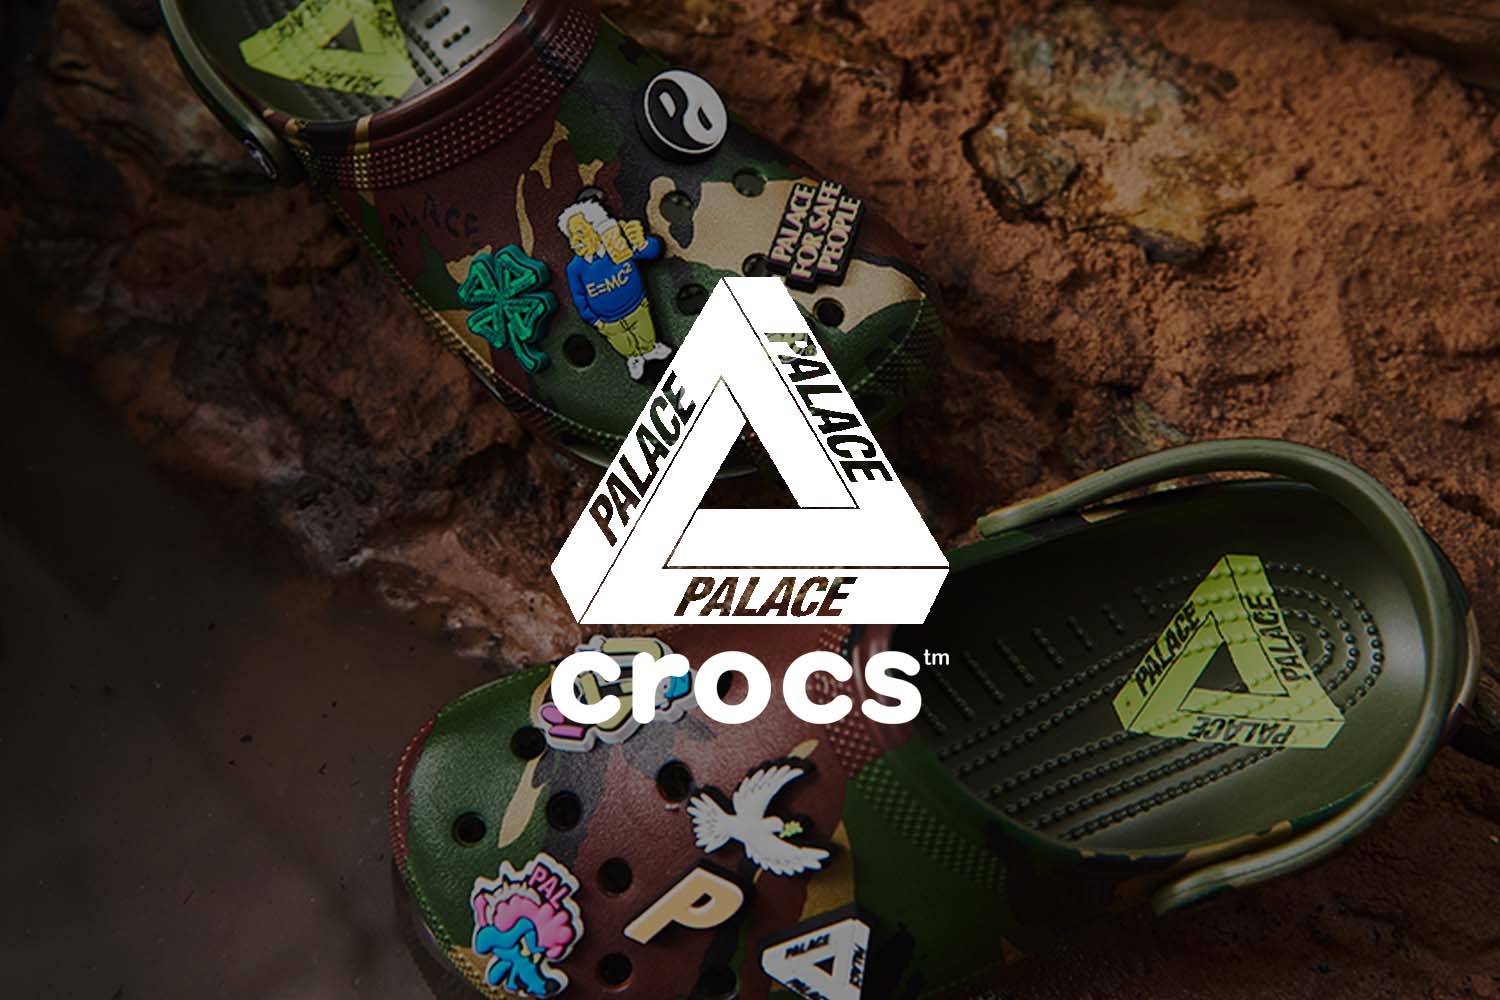 Palace Skateboards x Crocs come up with a new collab